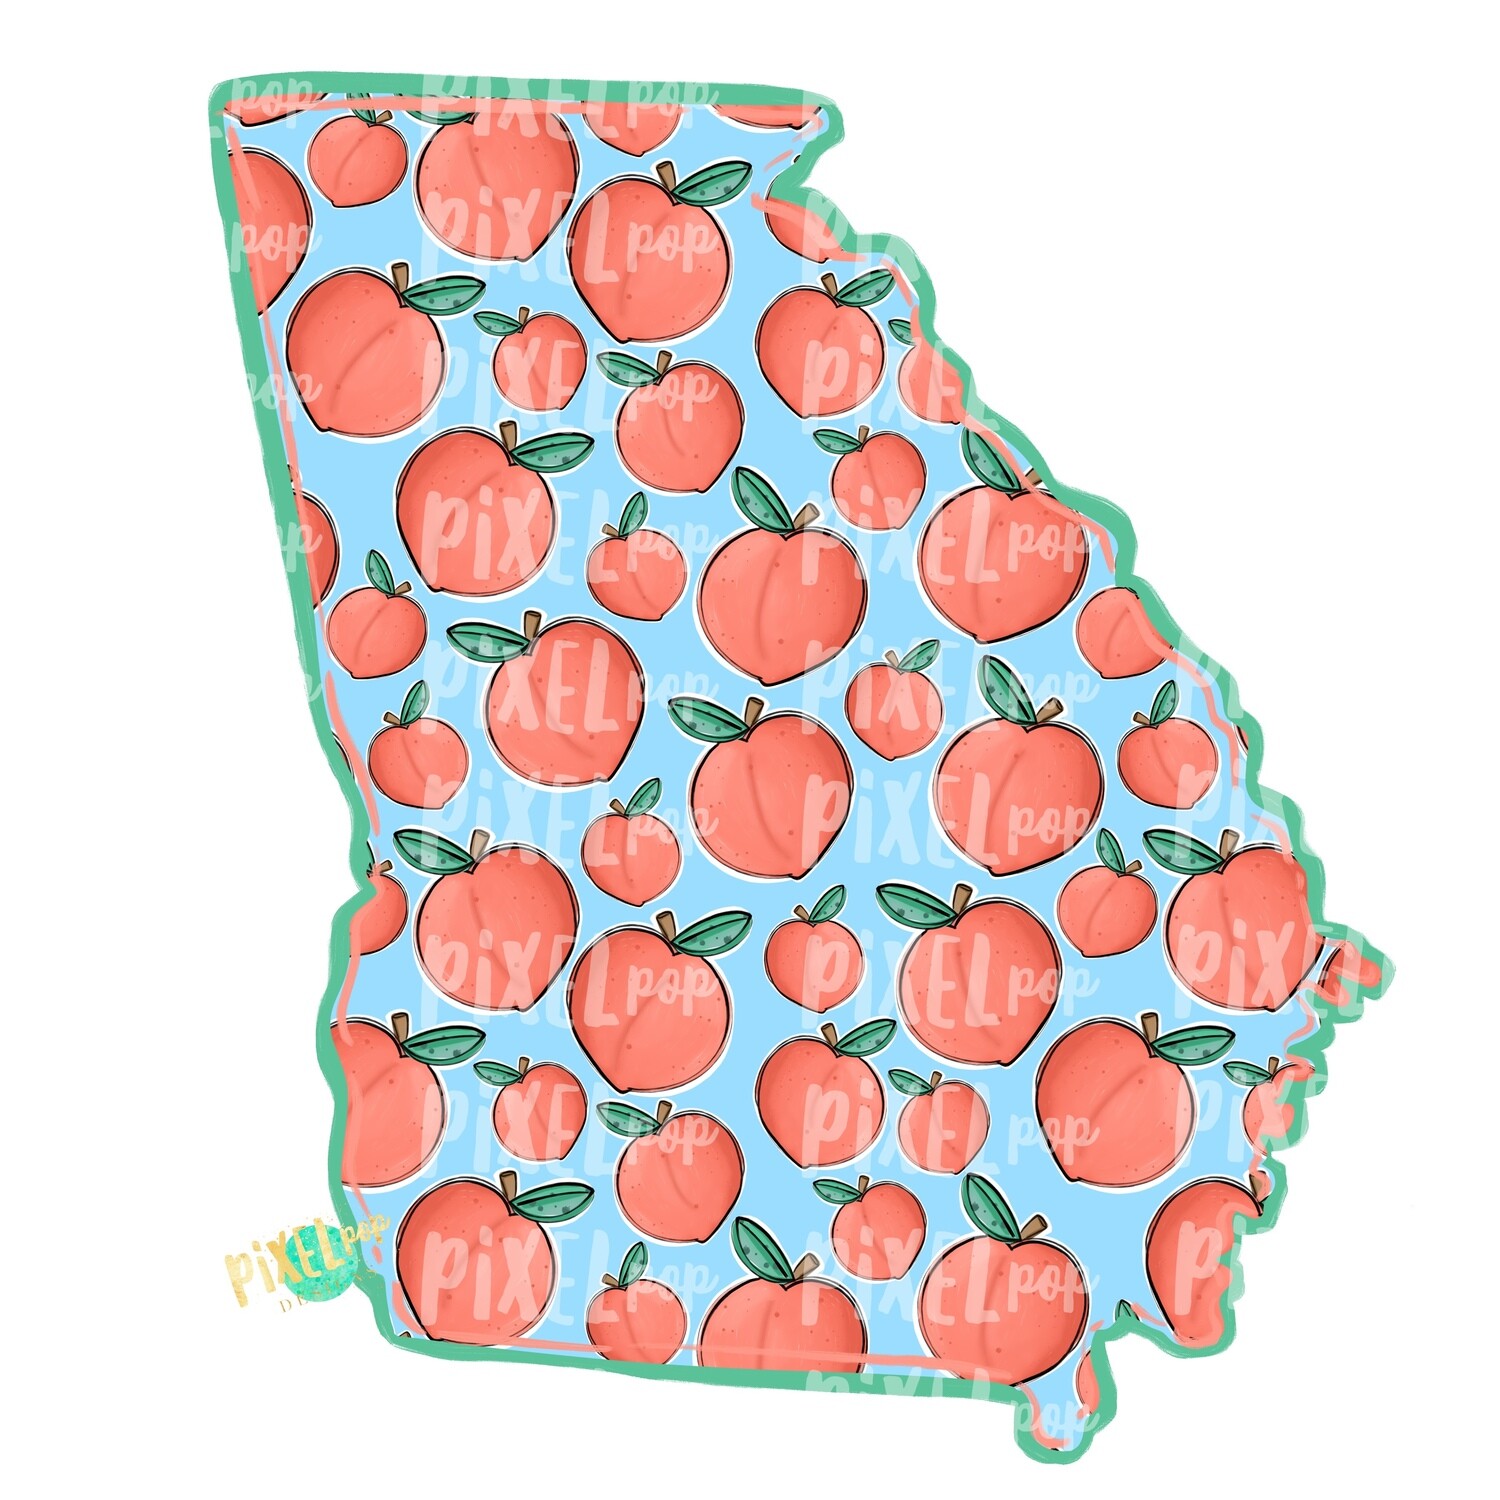 State of Georgia Shape with Peaches PNG | Georgia State | Home State | Sublimation Design | Heat Transfer | Digital | Peaches Background